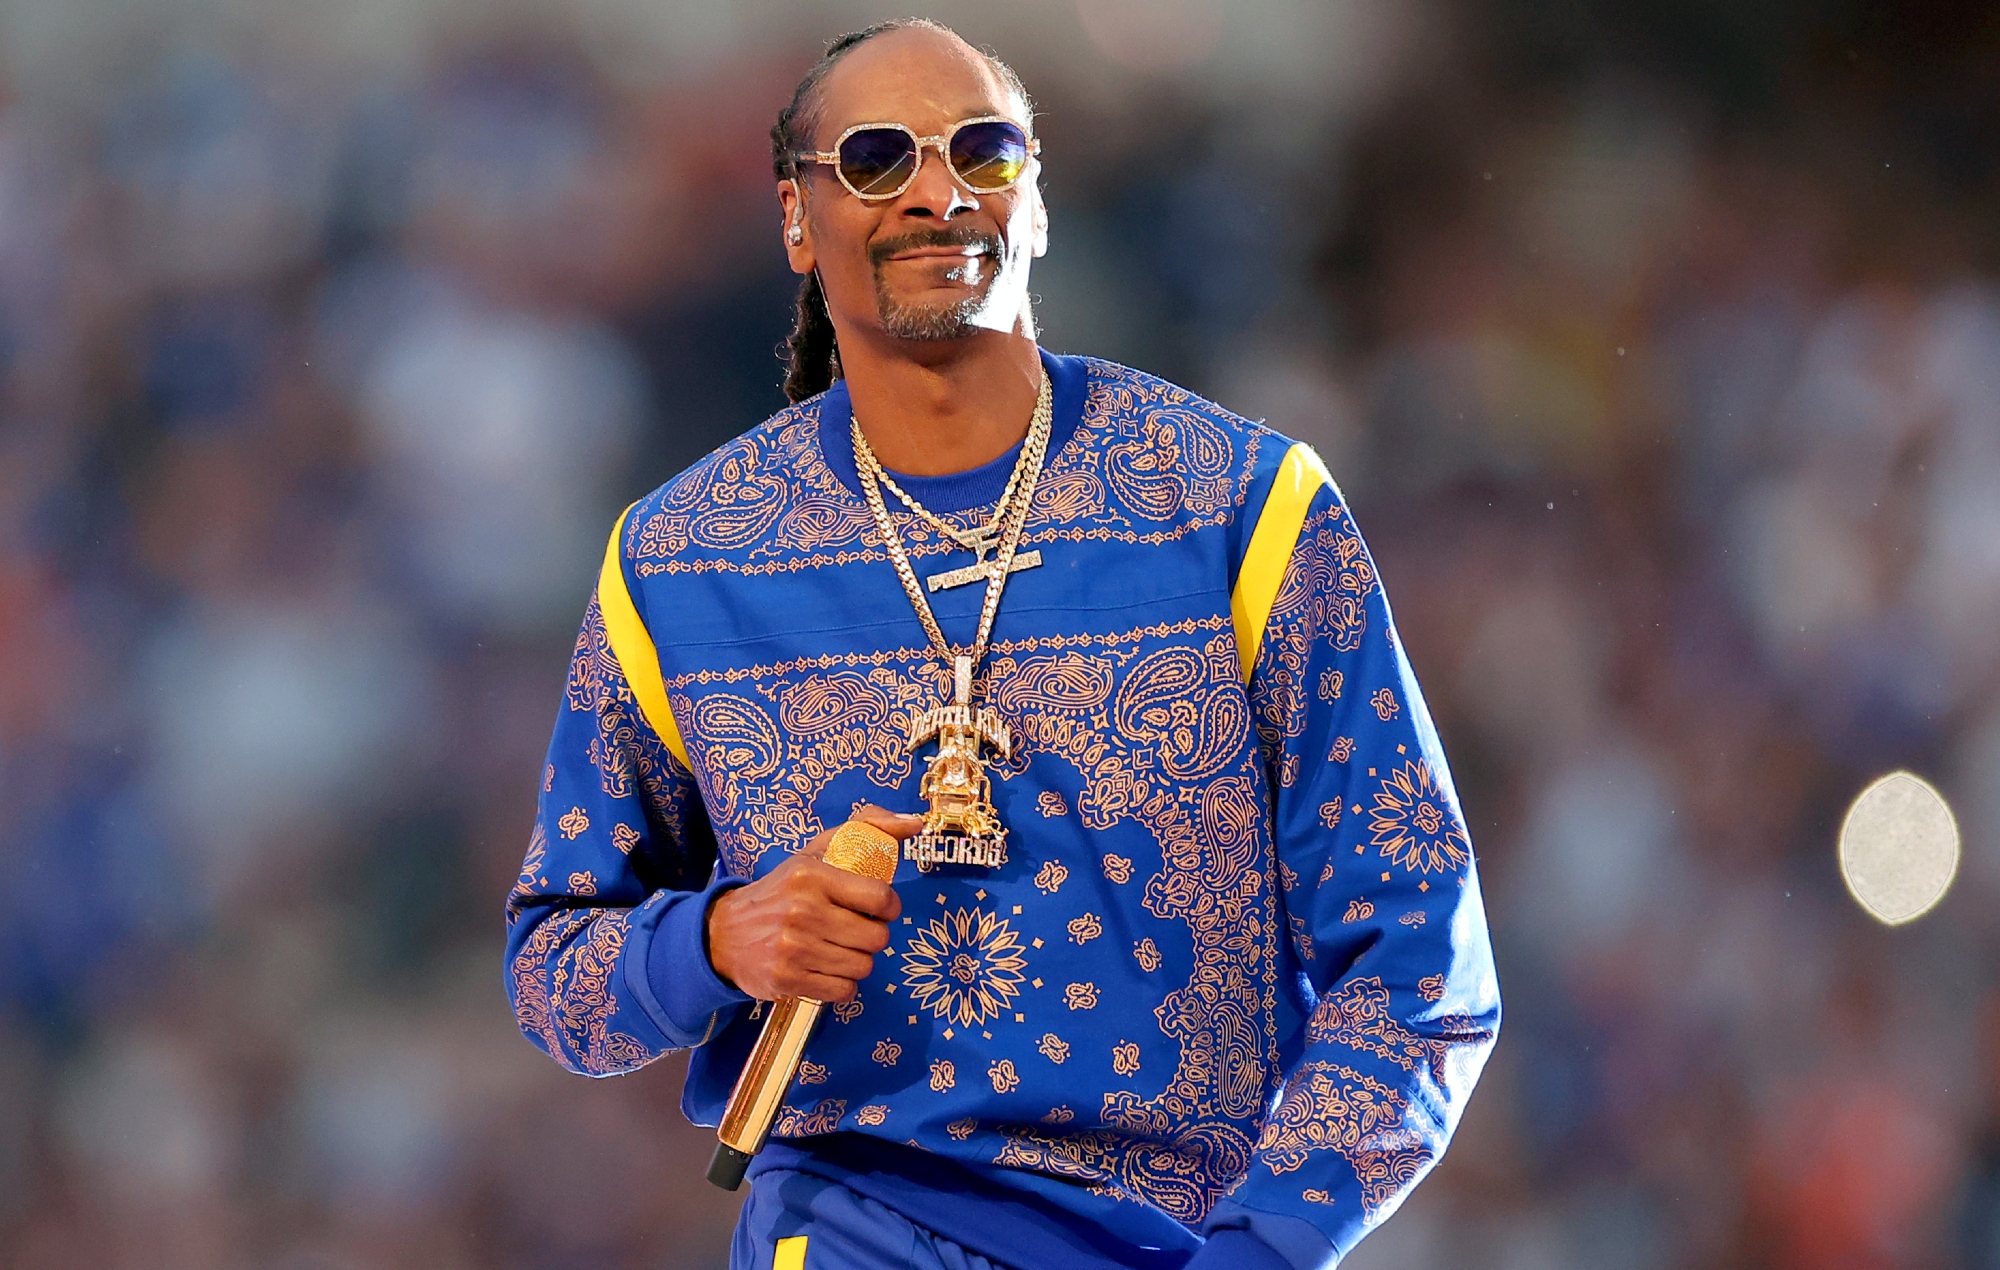 Check Out Snoop Dogg Filter Instagram And His Massive Net Worth